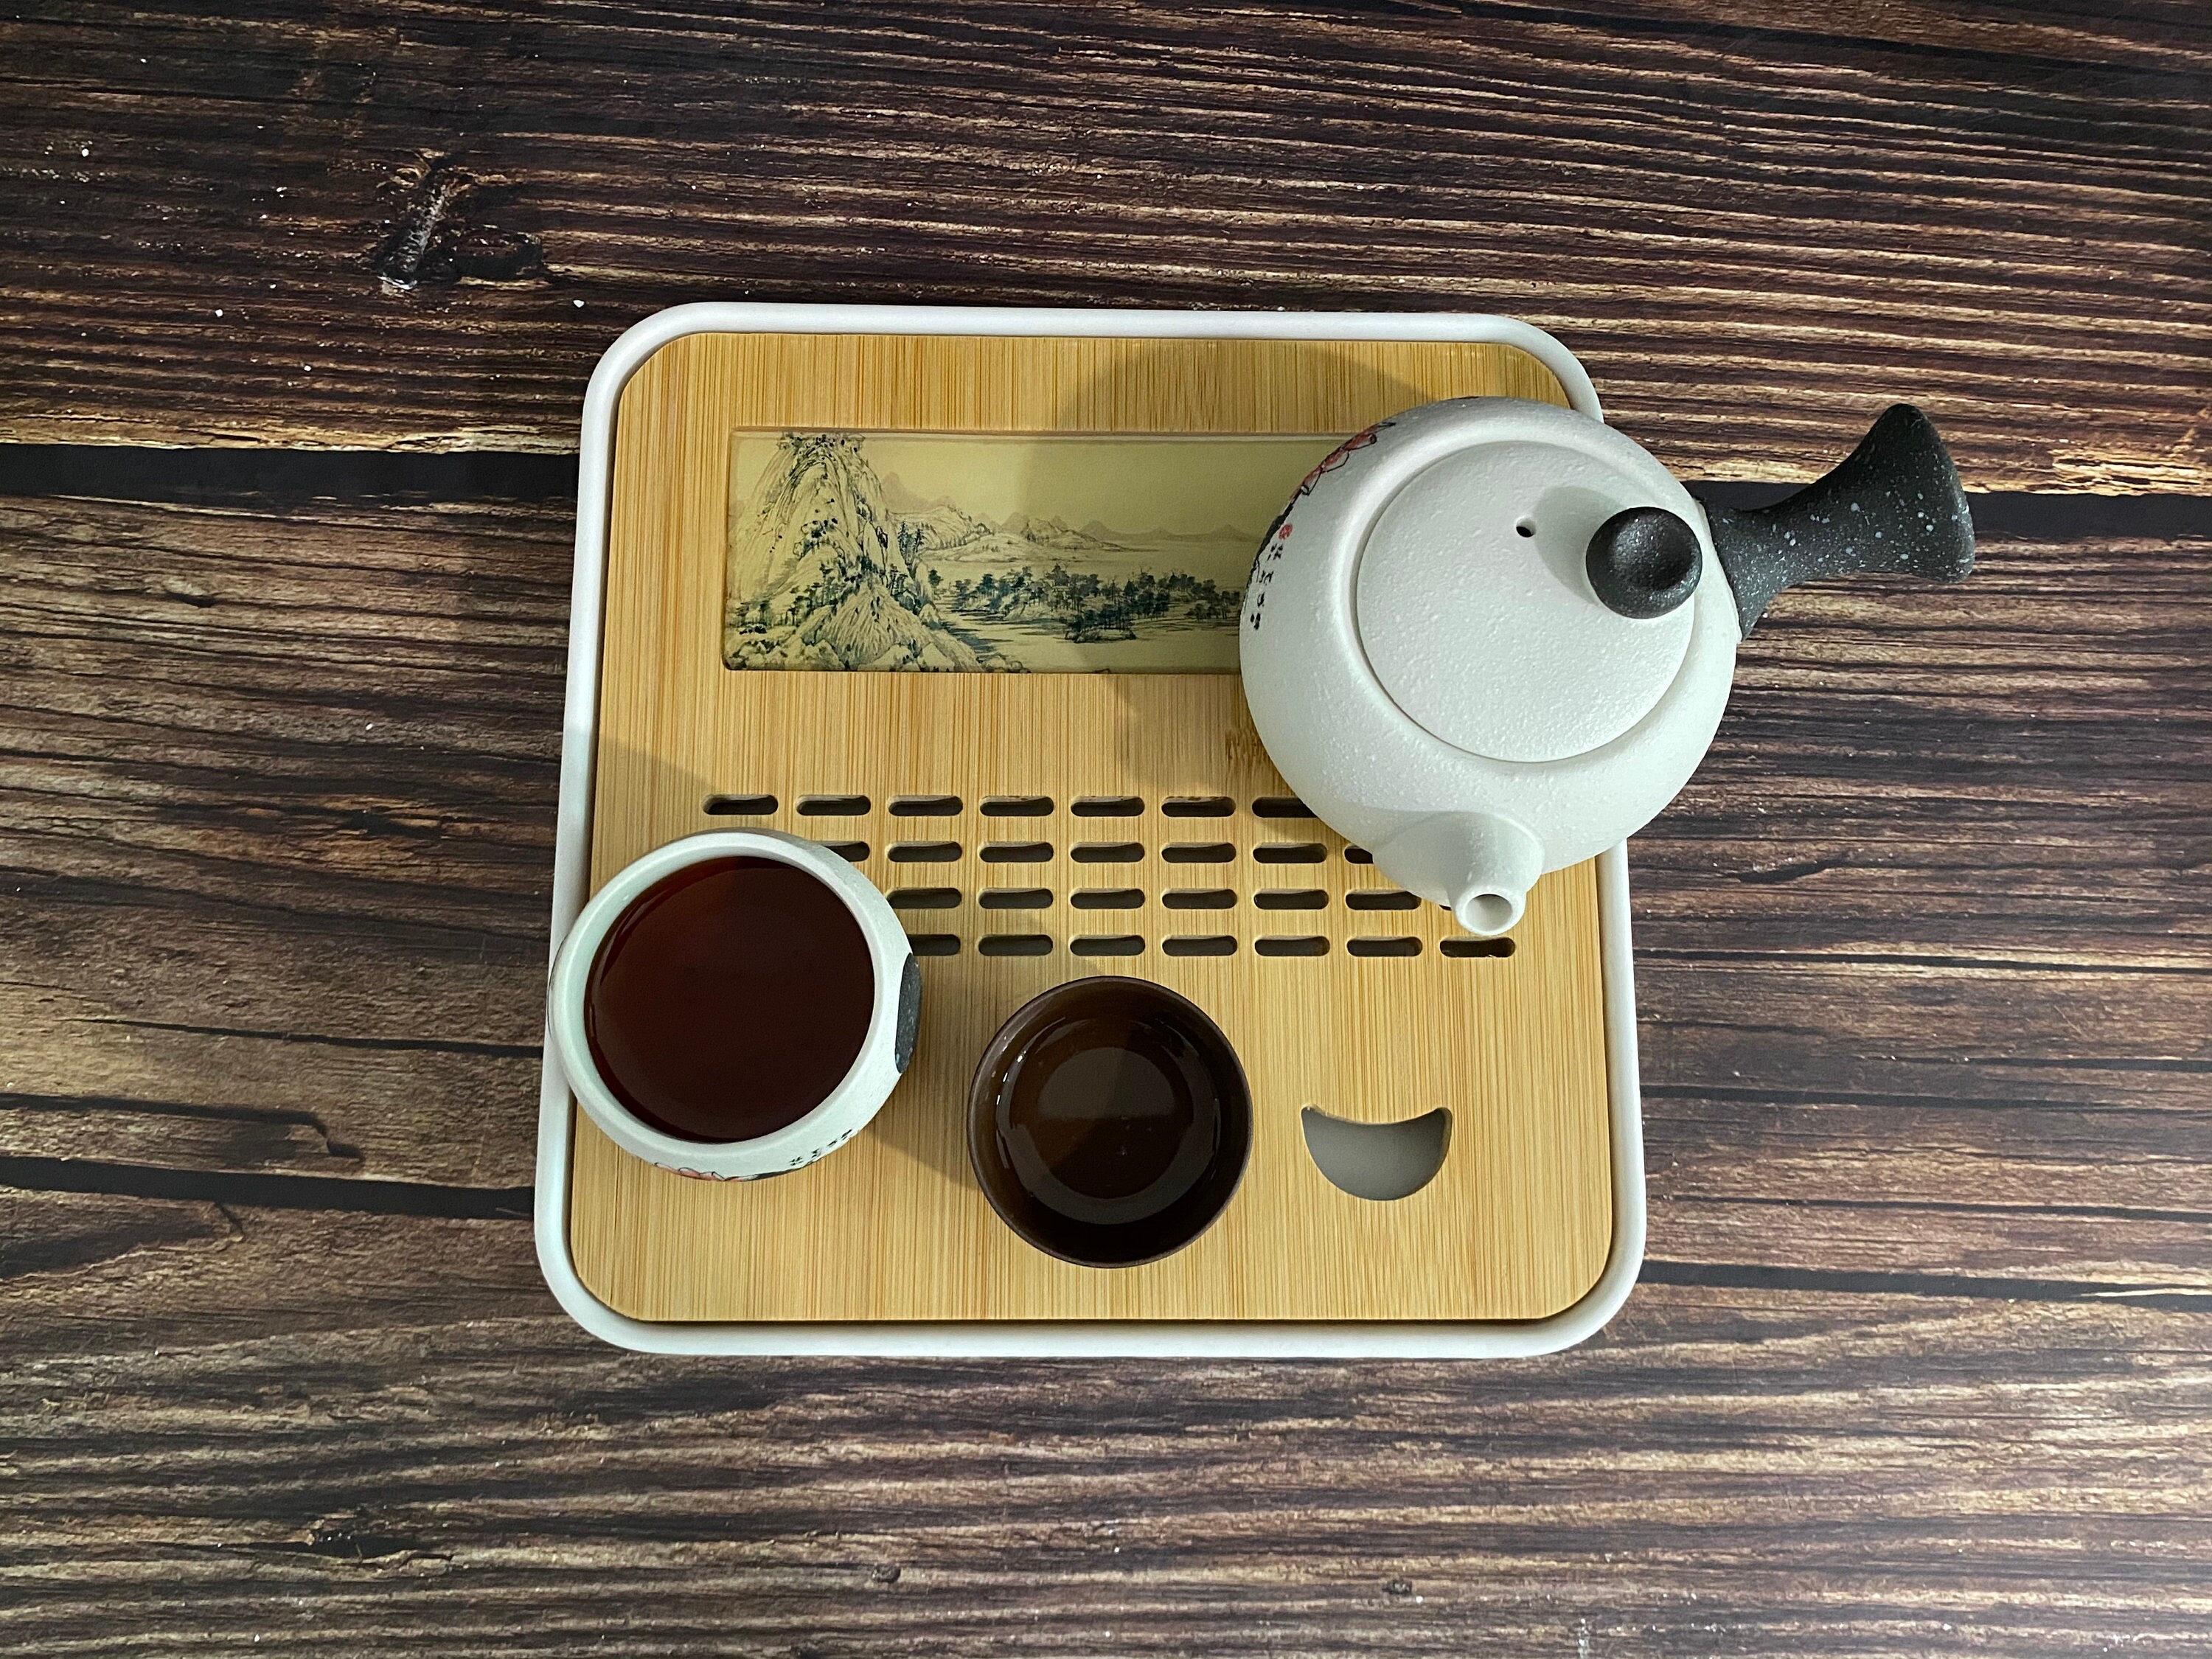 Tea table Tea Sets Chinese Kung Fu Tea Tray Japanese Style Household Tea Tray Tea Tray Abrasion Resistant Countertop Drainage Design Hand Polished Smooth Design 